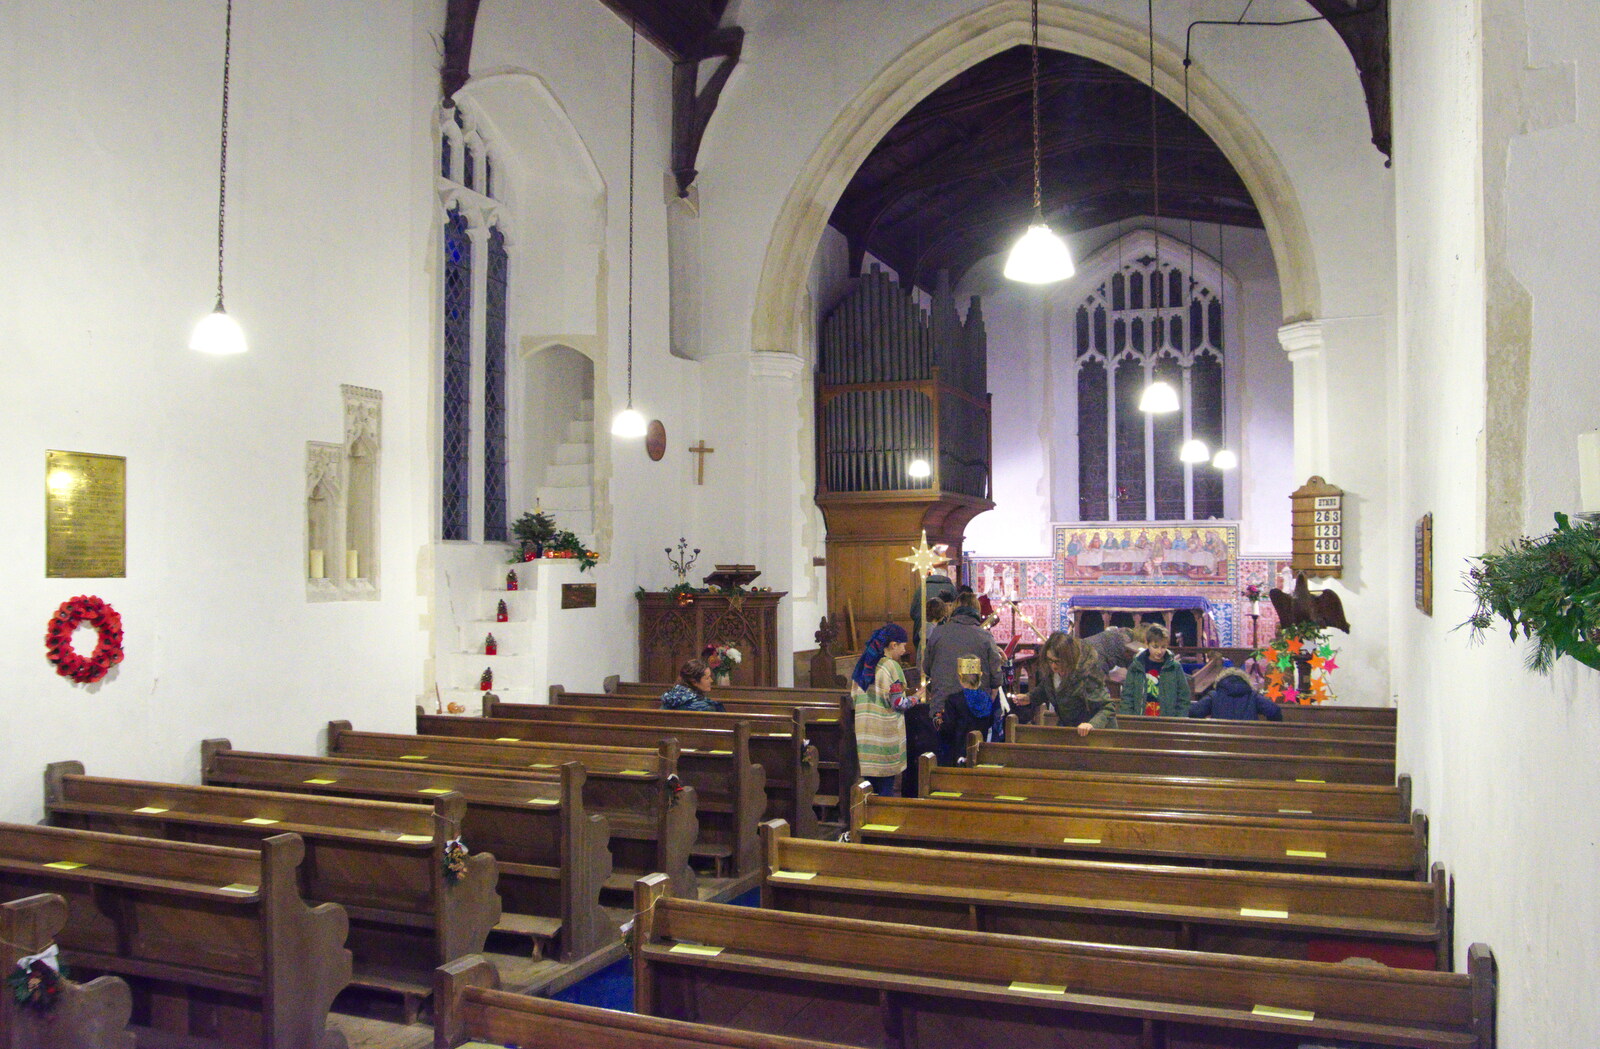 The nave of Oakley church, before the crowds arrive from A Christingle Service, St. Nicholas Church, Oakley, Suffolk - 24th December 2019